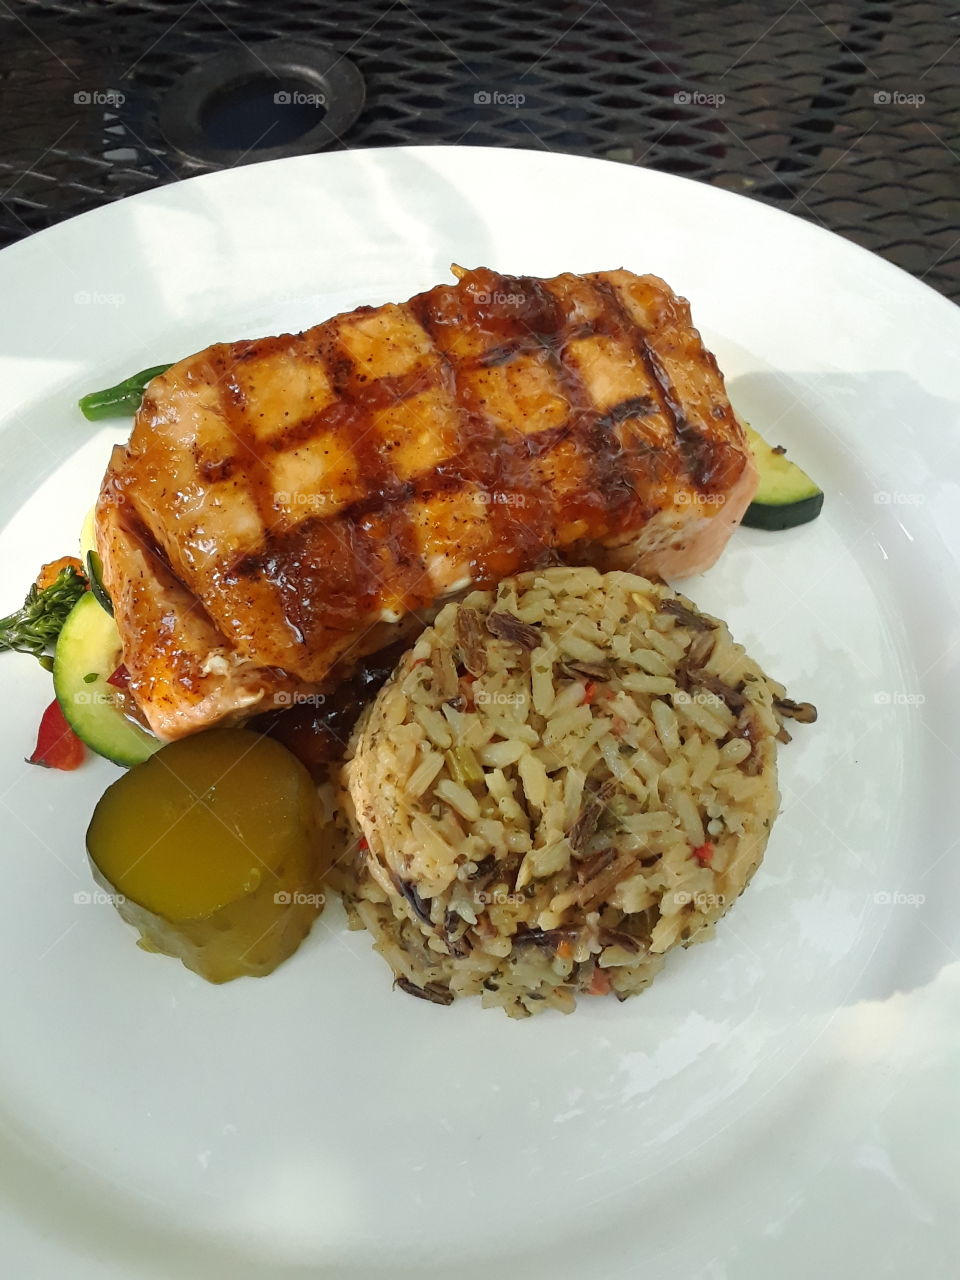 Vivilore restraurant Independence Missouri Salmon glazes with apricot with rice